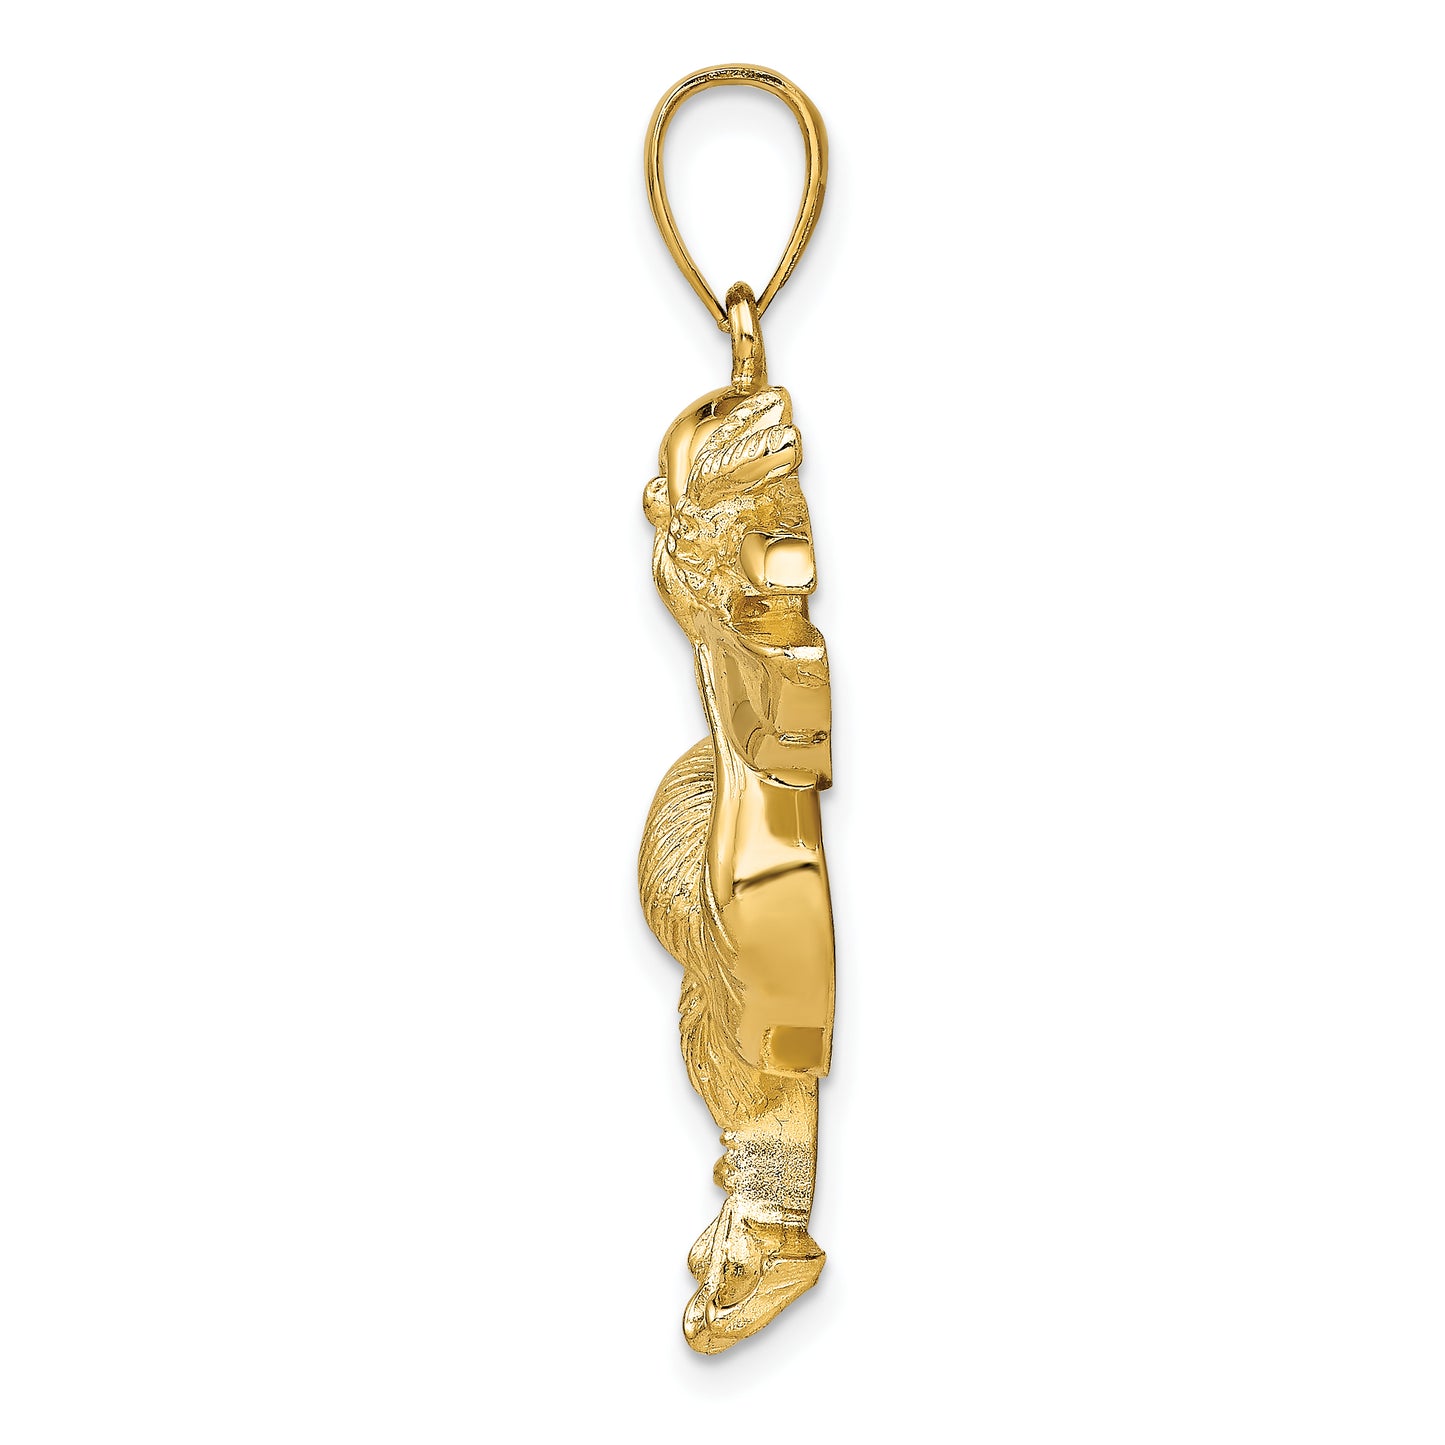 14K Pelican with Fish In Mouth Charm